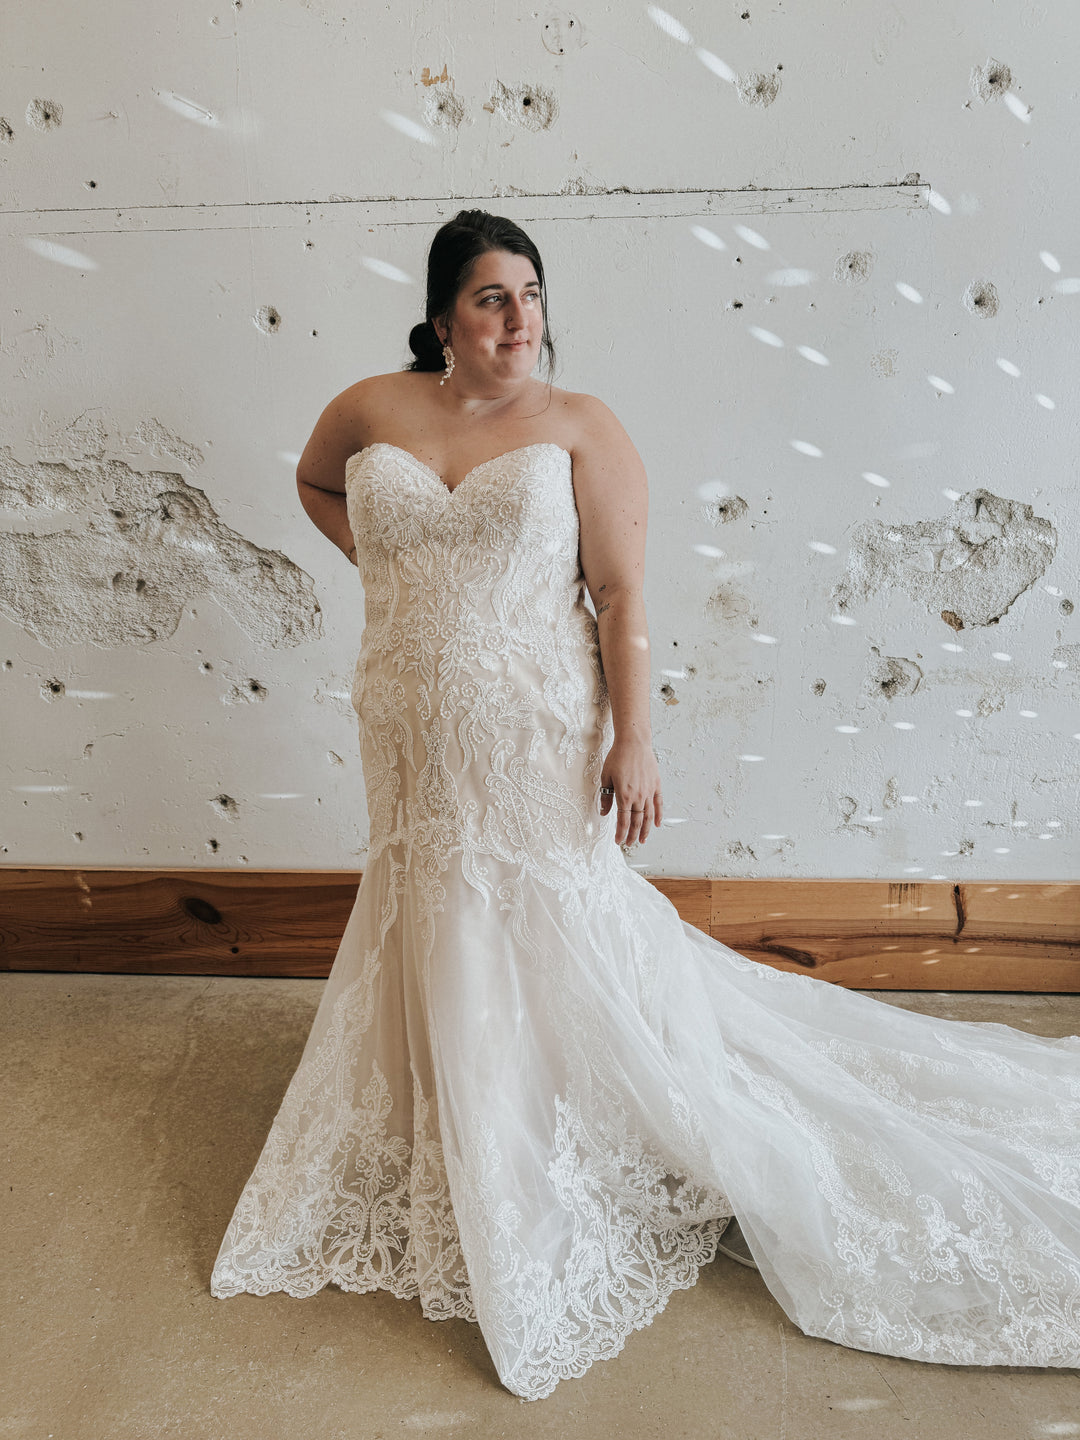 Tag Size 28 | Dearly Loved Bridal